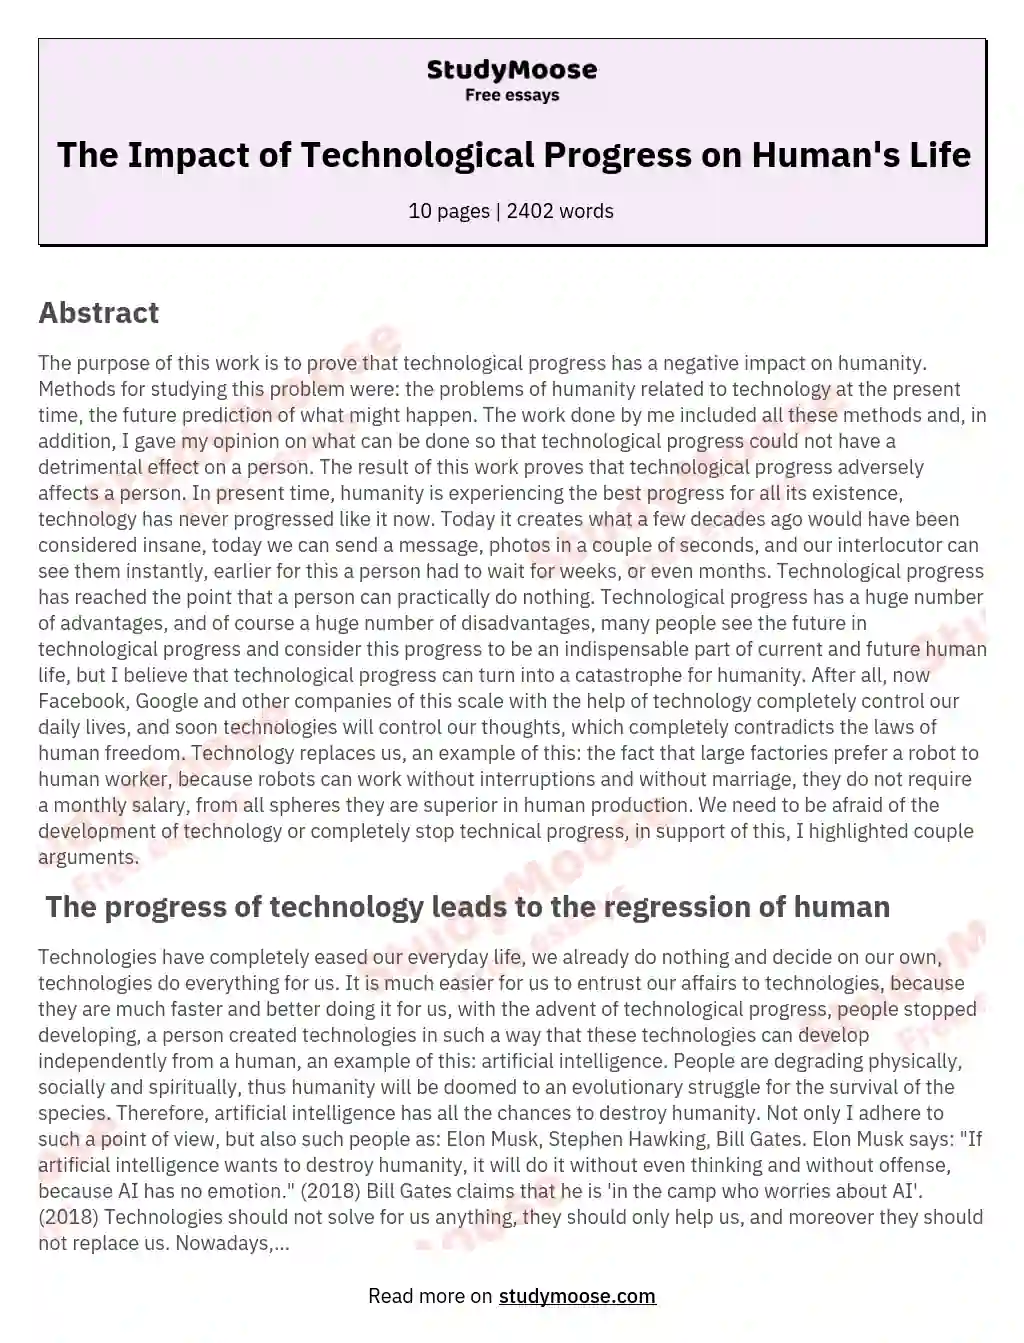 The Impact of Technological Progress on Human's Life essay